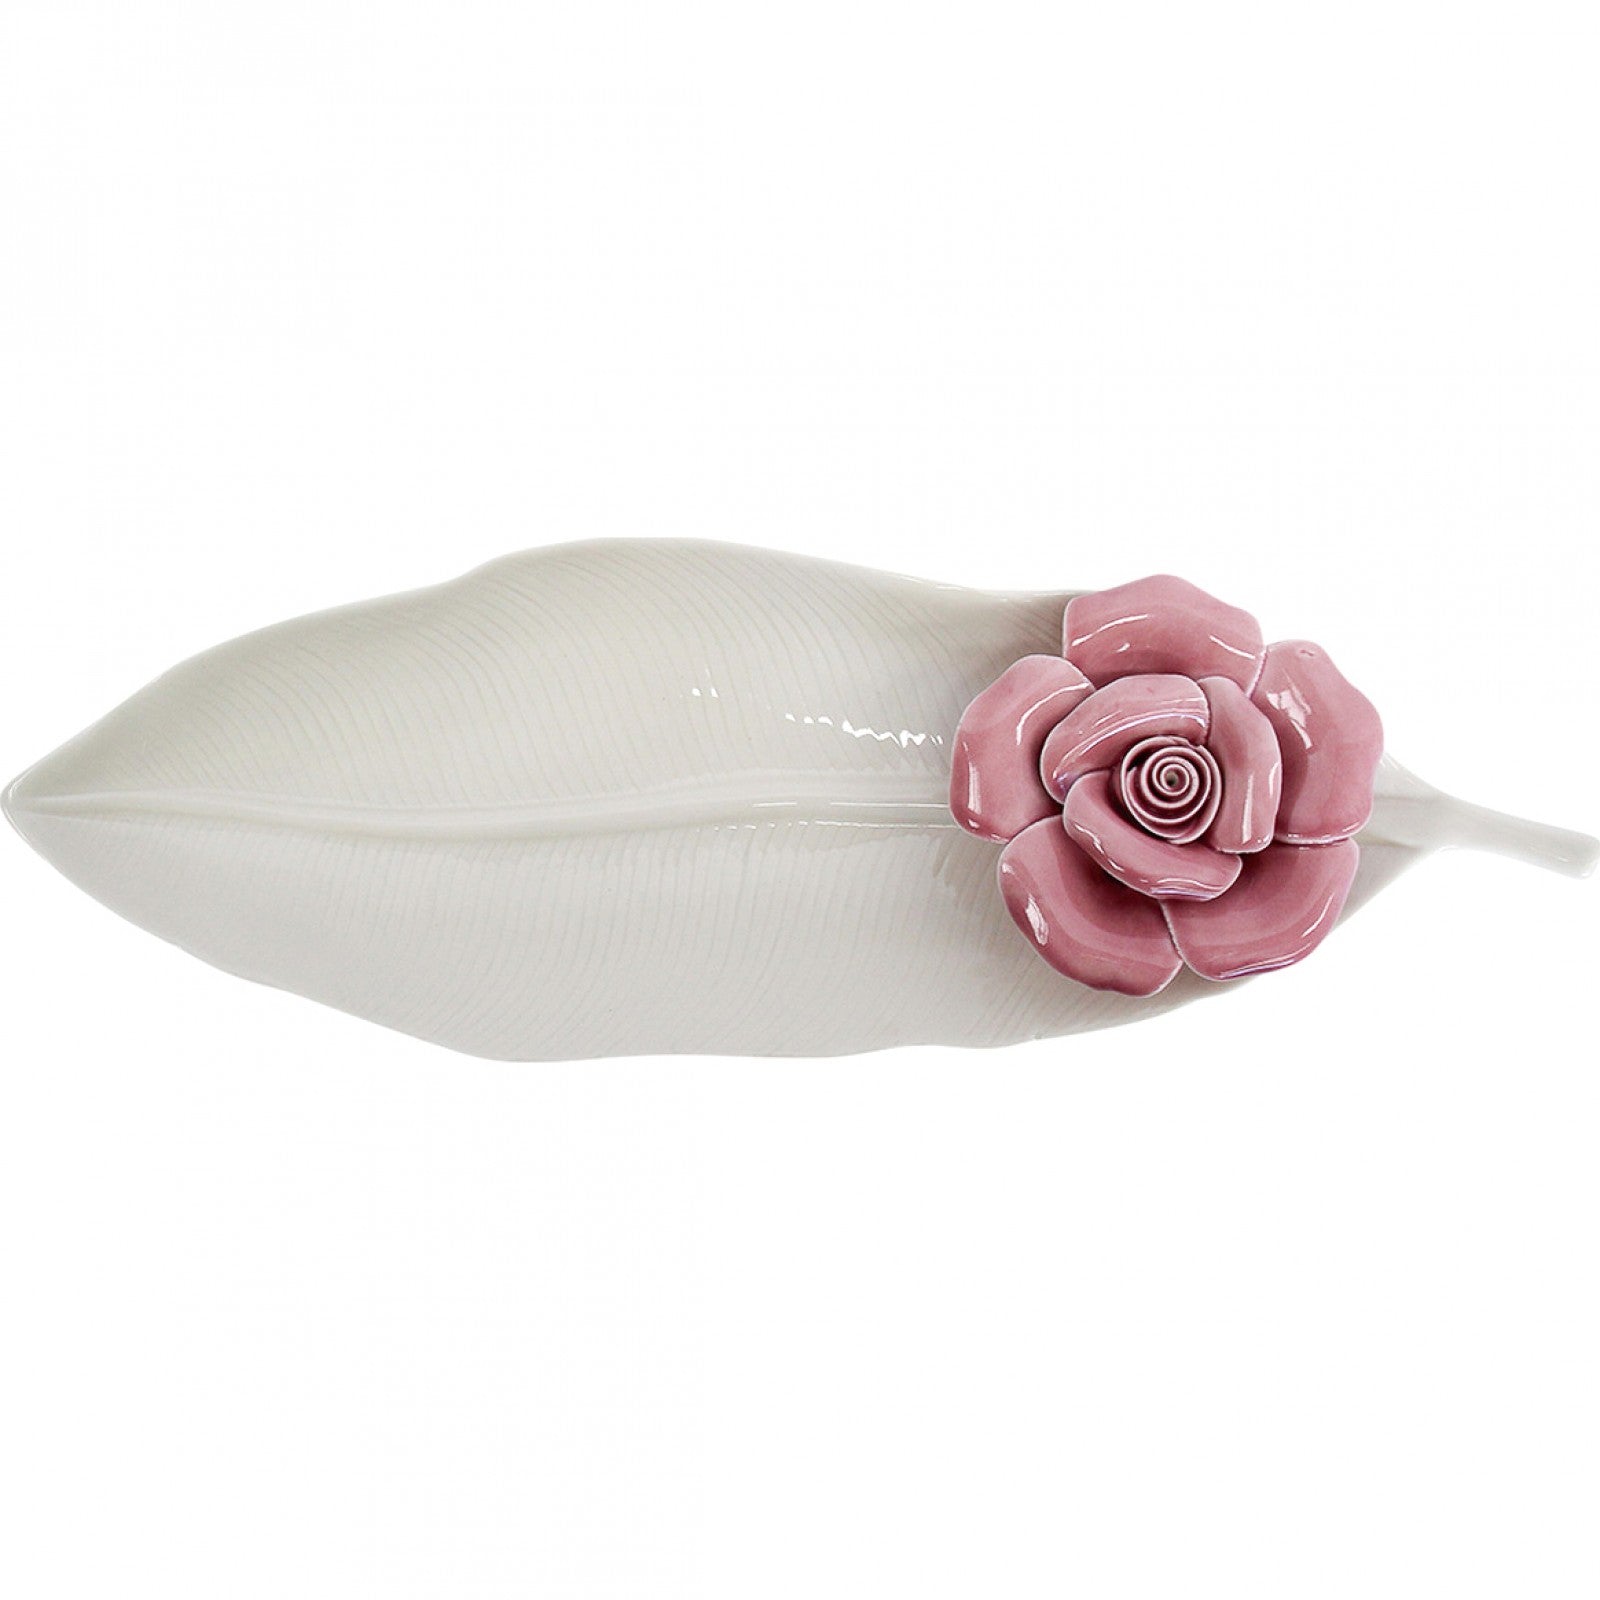 Leaf Plate White with Pink Flower - The Renmy Store